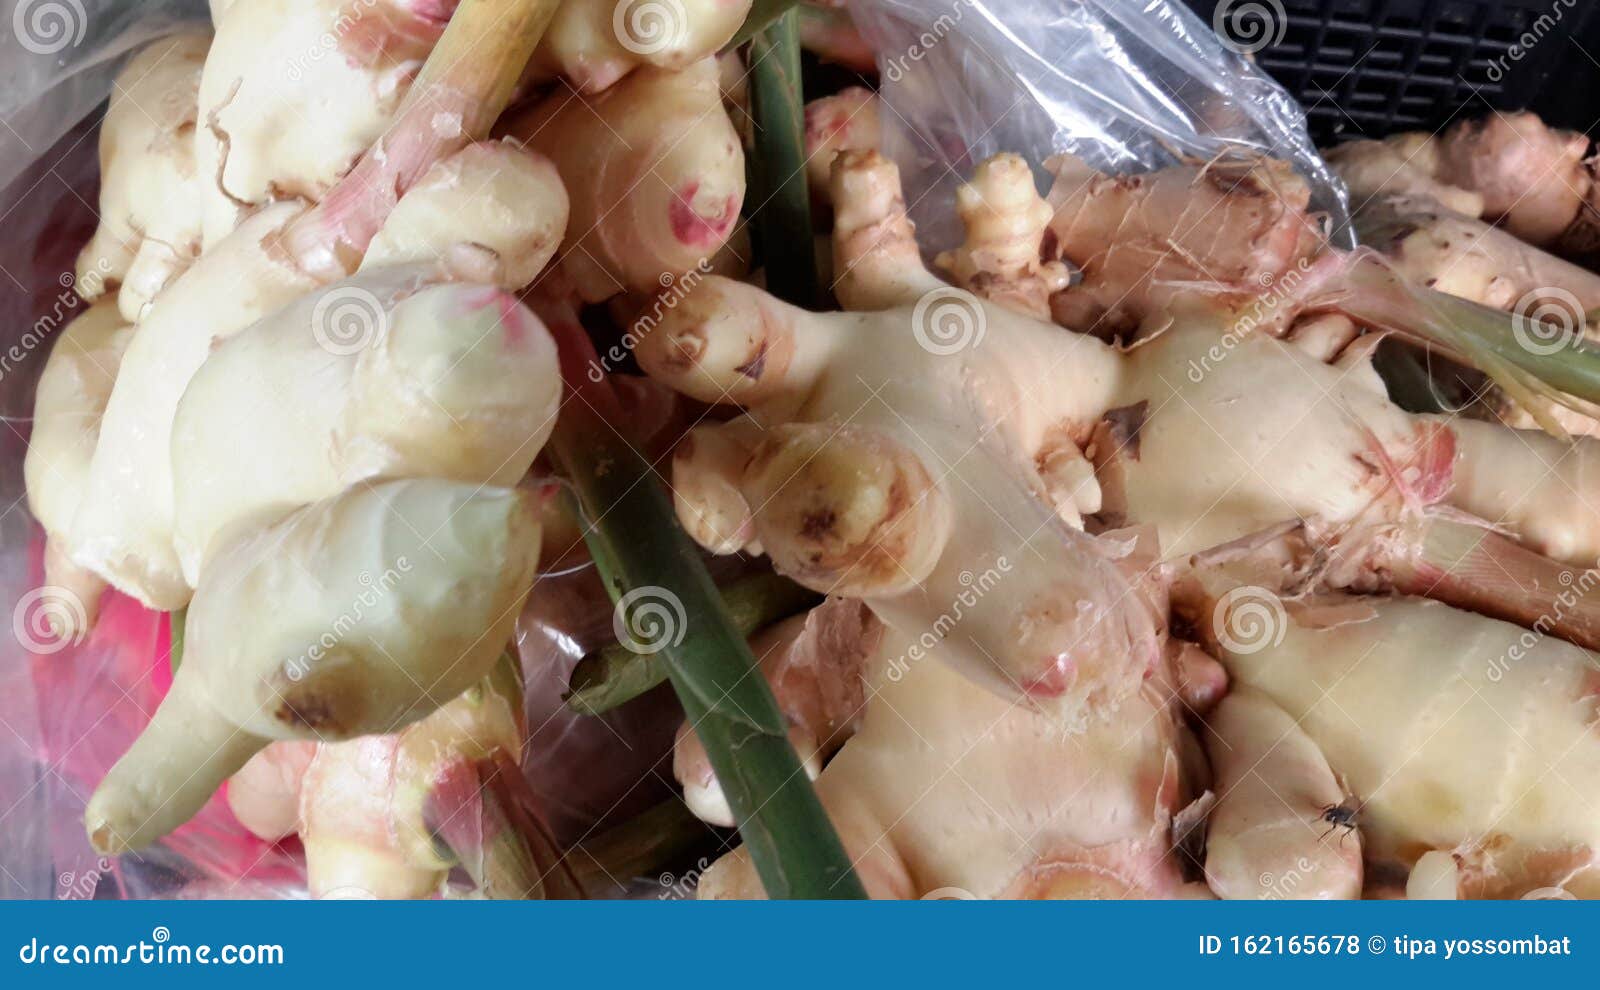 The Baby Ginger For Healthy Chinese Food Stock Photo ...